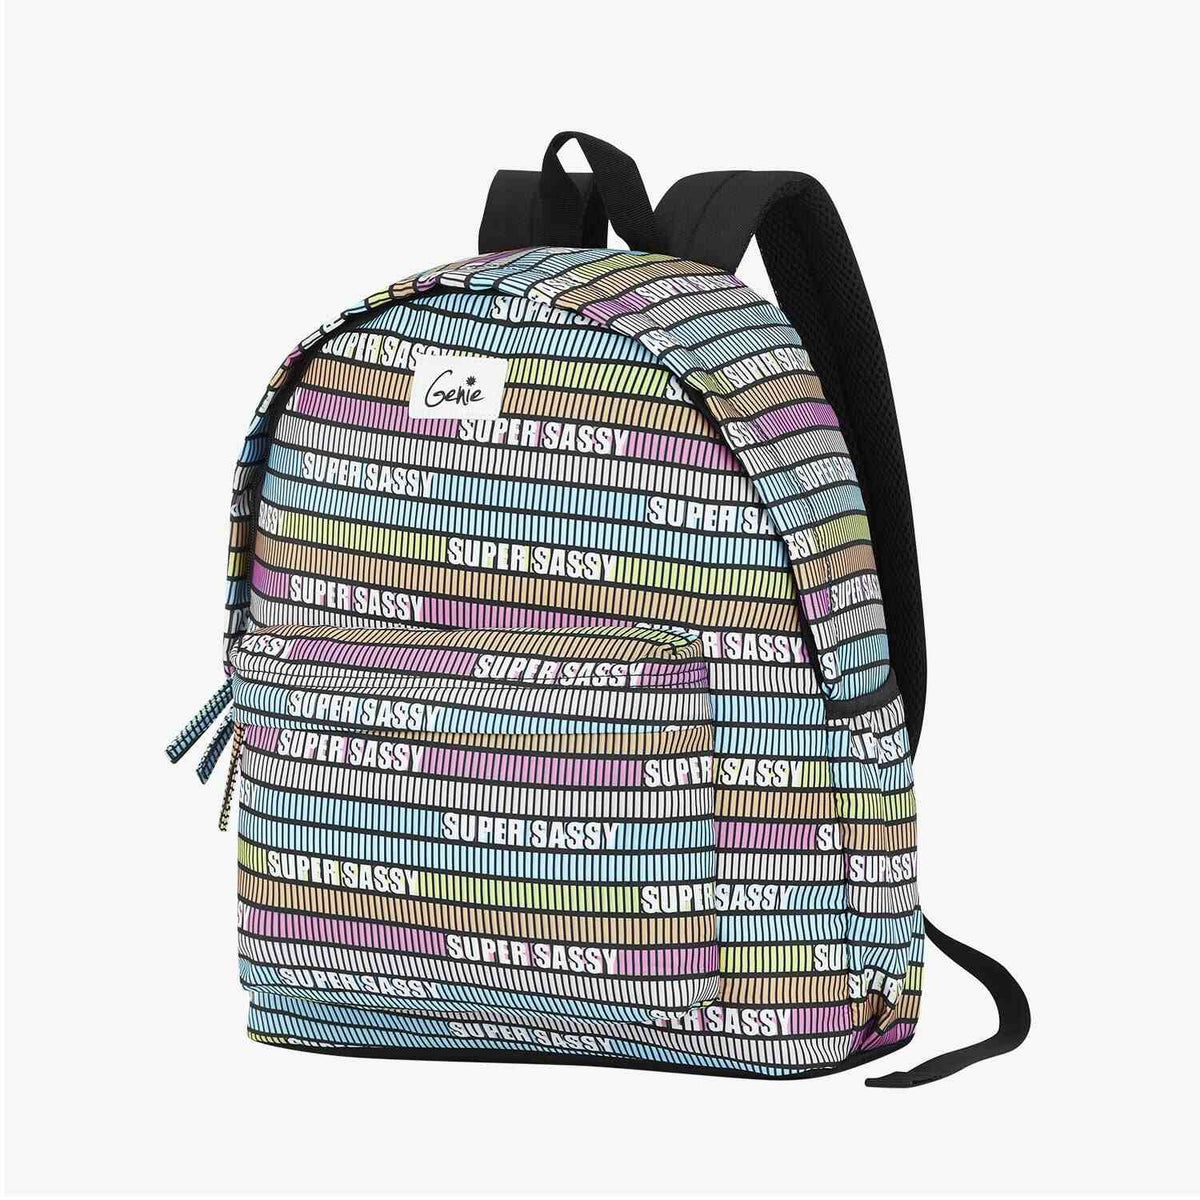 Up To 80% Off on Small Nylon Backpack for Wome... | Groupon Goods